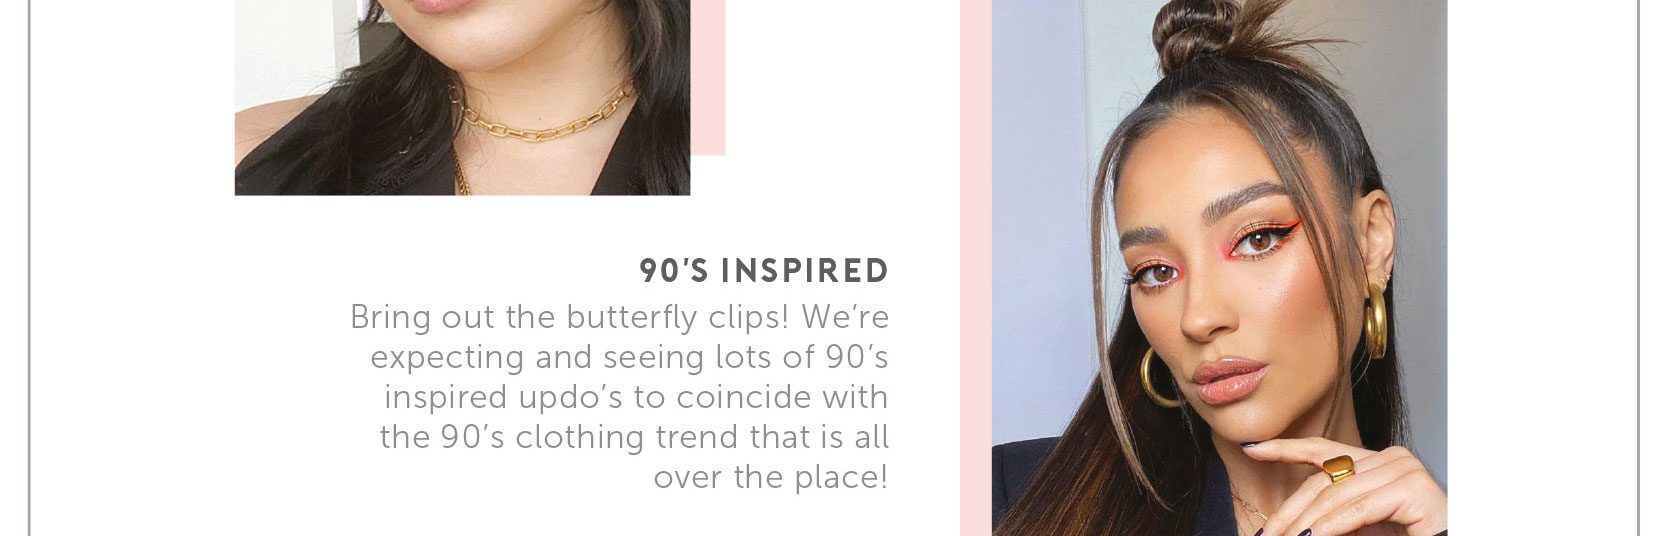 90's Inspired. Bring out the butterfly clips! We're expecting and seeing lots of 90's inspired updo's to coincide with the 90's clothing trend that is all over the place!